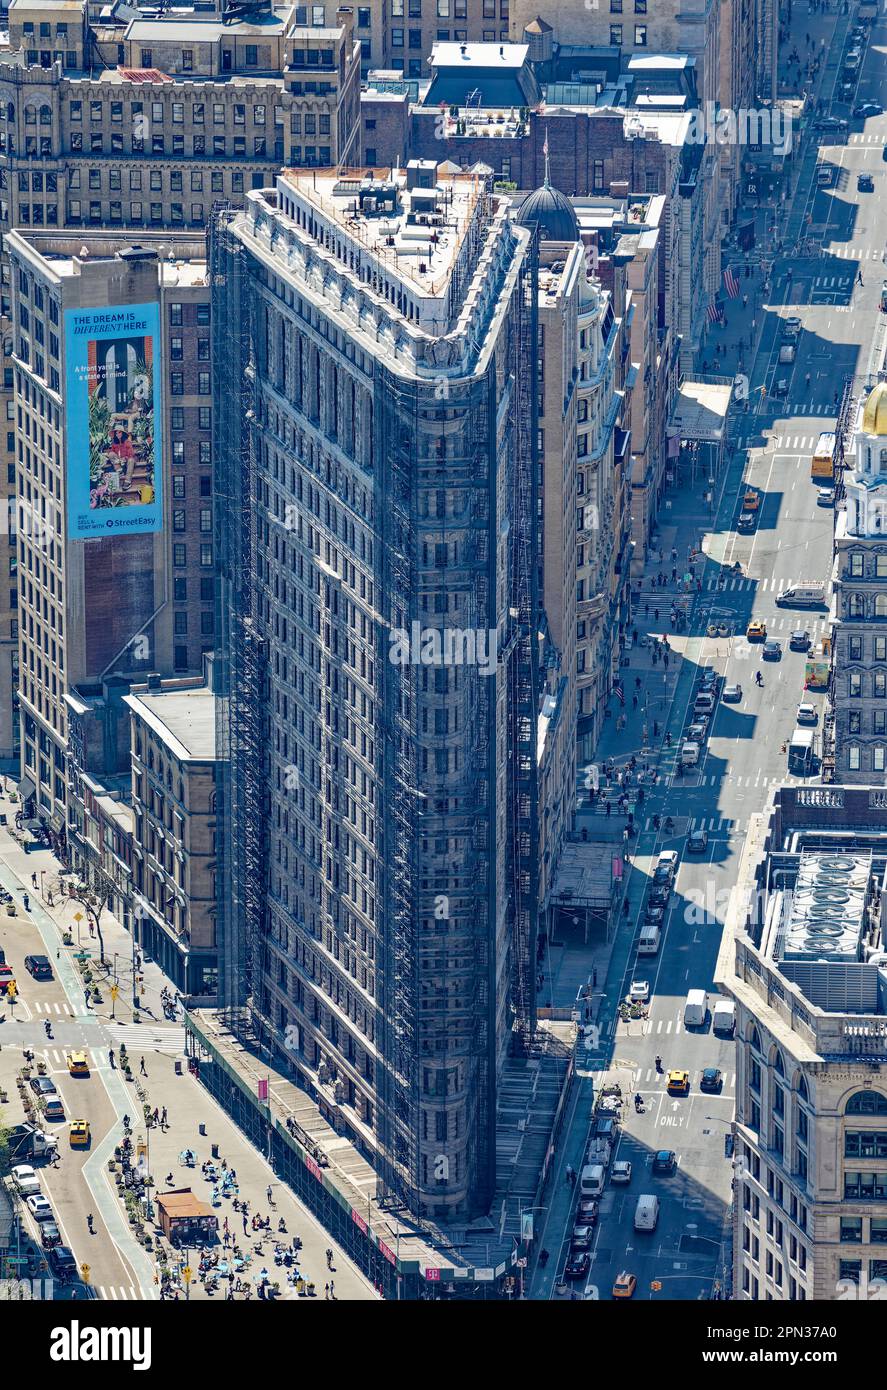 Flatiron Building, a NYC icon, viewed through haze from another icon, the Empire State Building. Renovation scaffolds obscure the façade. Stock Photo